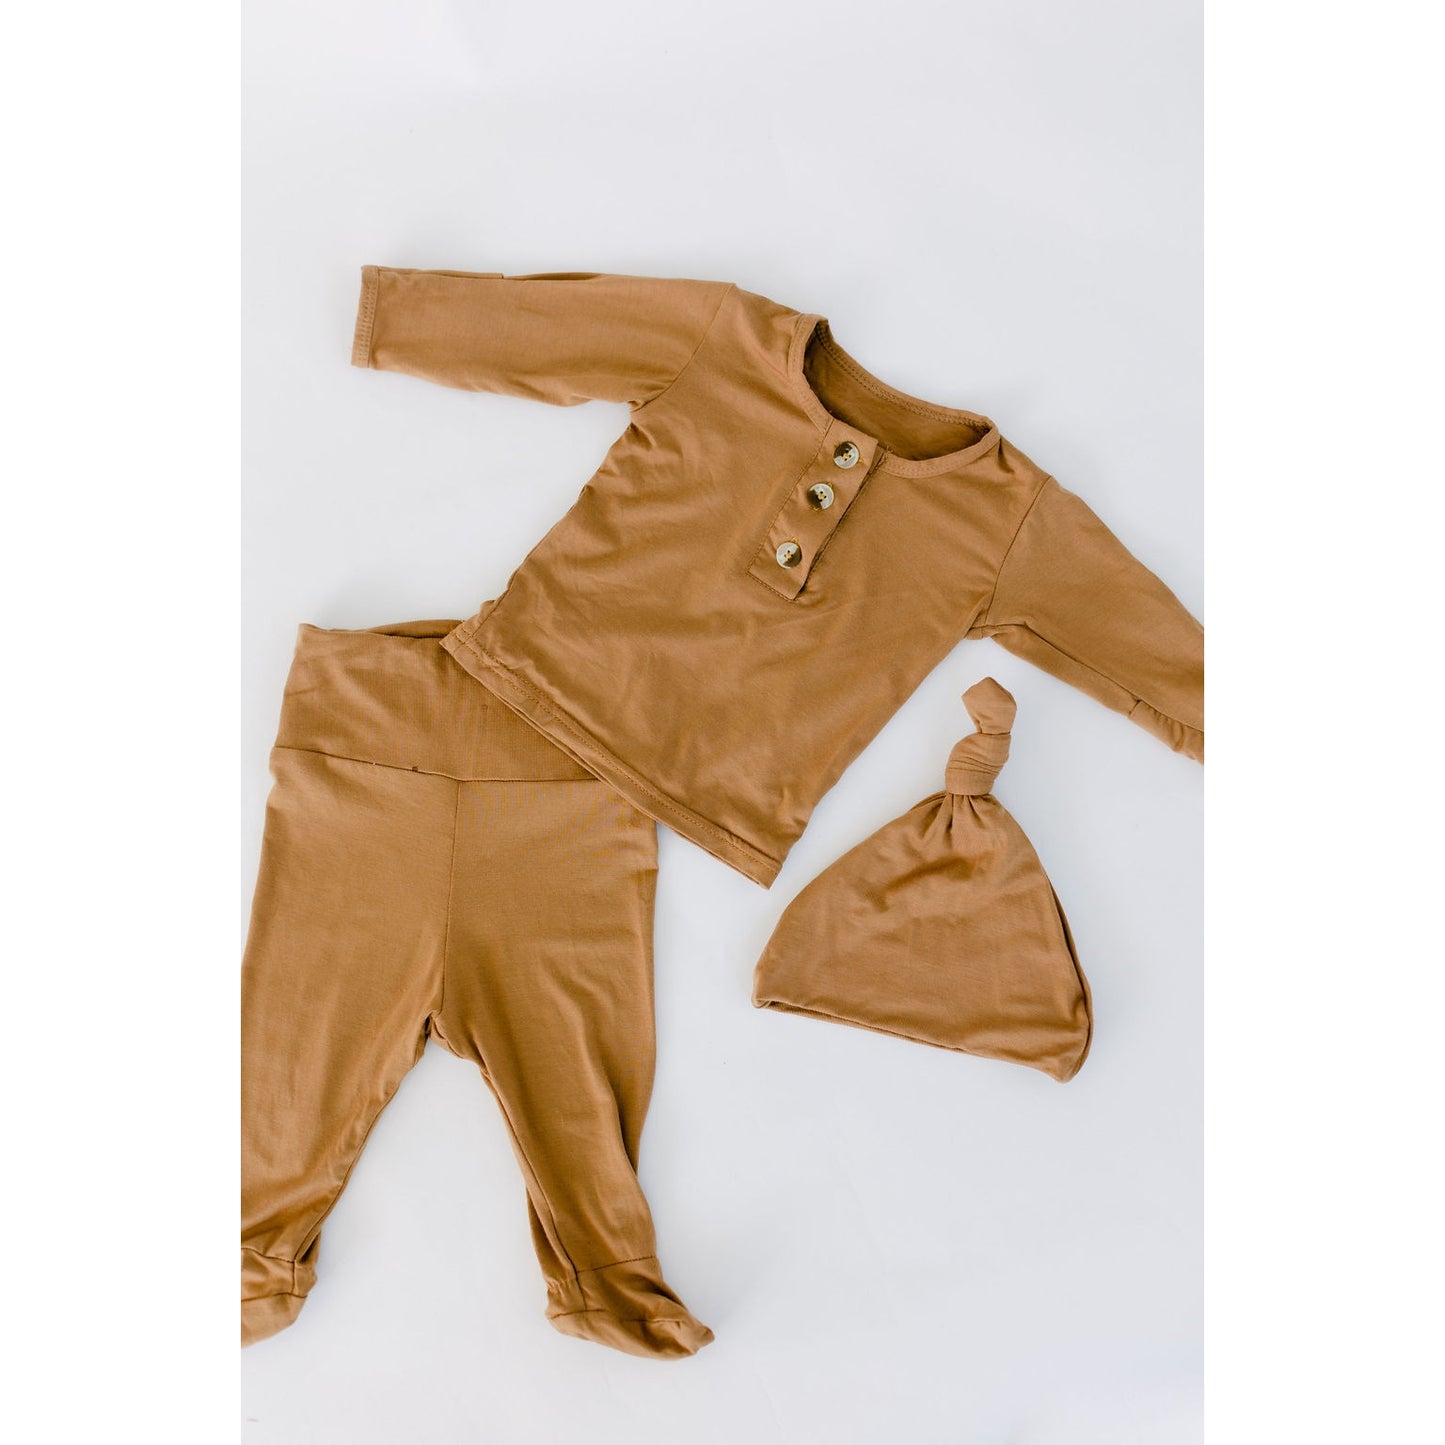 Baby Top & Bottom Outfit - Navy, Black, Camel, Pink, Sand, White